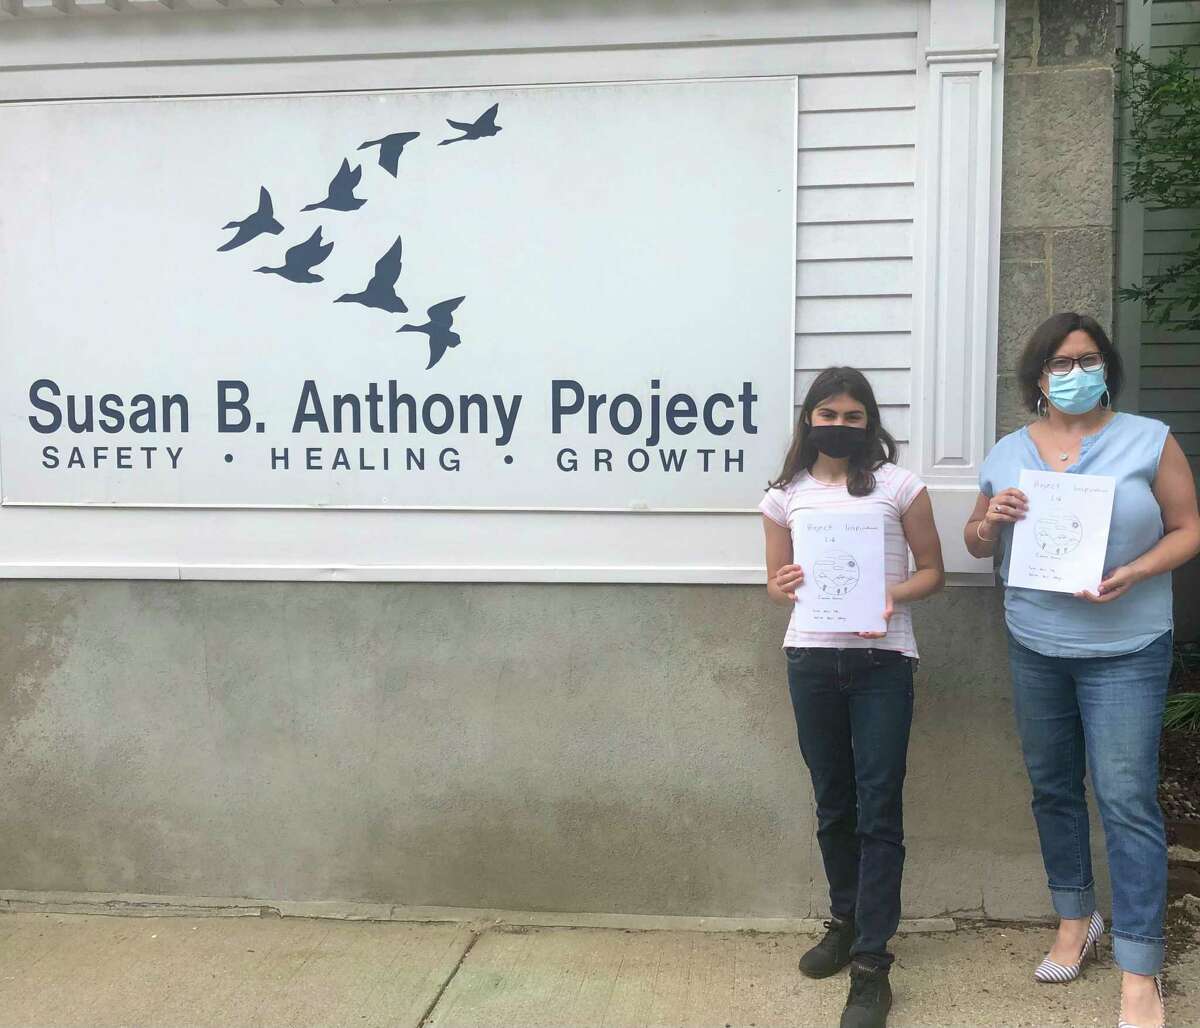 Cianna Ferraro, 13, an eighth-grader at Northwest Regional No. 7, created and donated more than 80 coloring books with uplifting messages and activities to the Susan B. Anthony Project June 4. She is pictured with Gina Devaux from Susan B. Anthony.